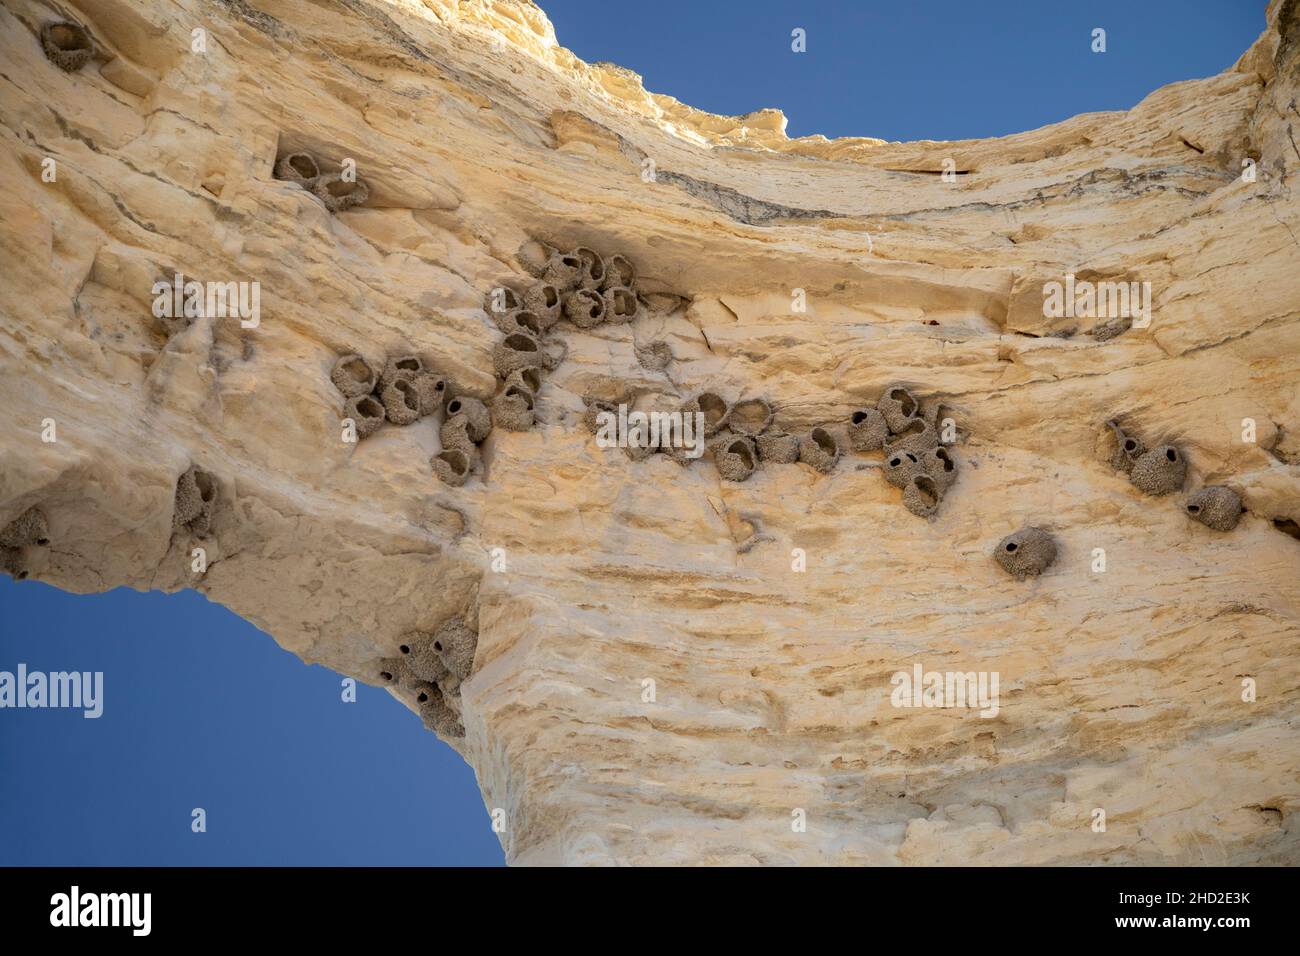 Oakley, Kansas - The nests of cliff swallows at the top of Monument Rocks, also known as Chalk Pyramids. Monument Rocks is a Niobrara chalk formation Stock Photo